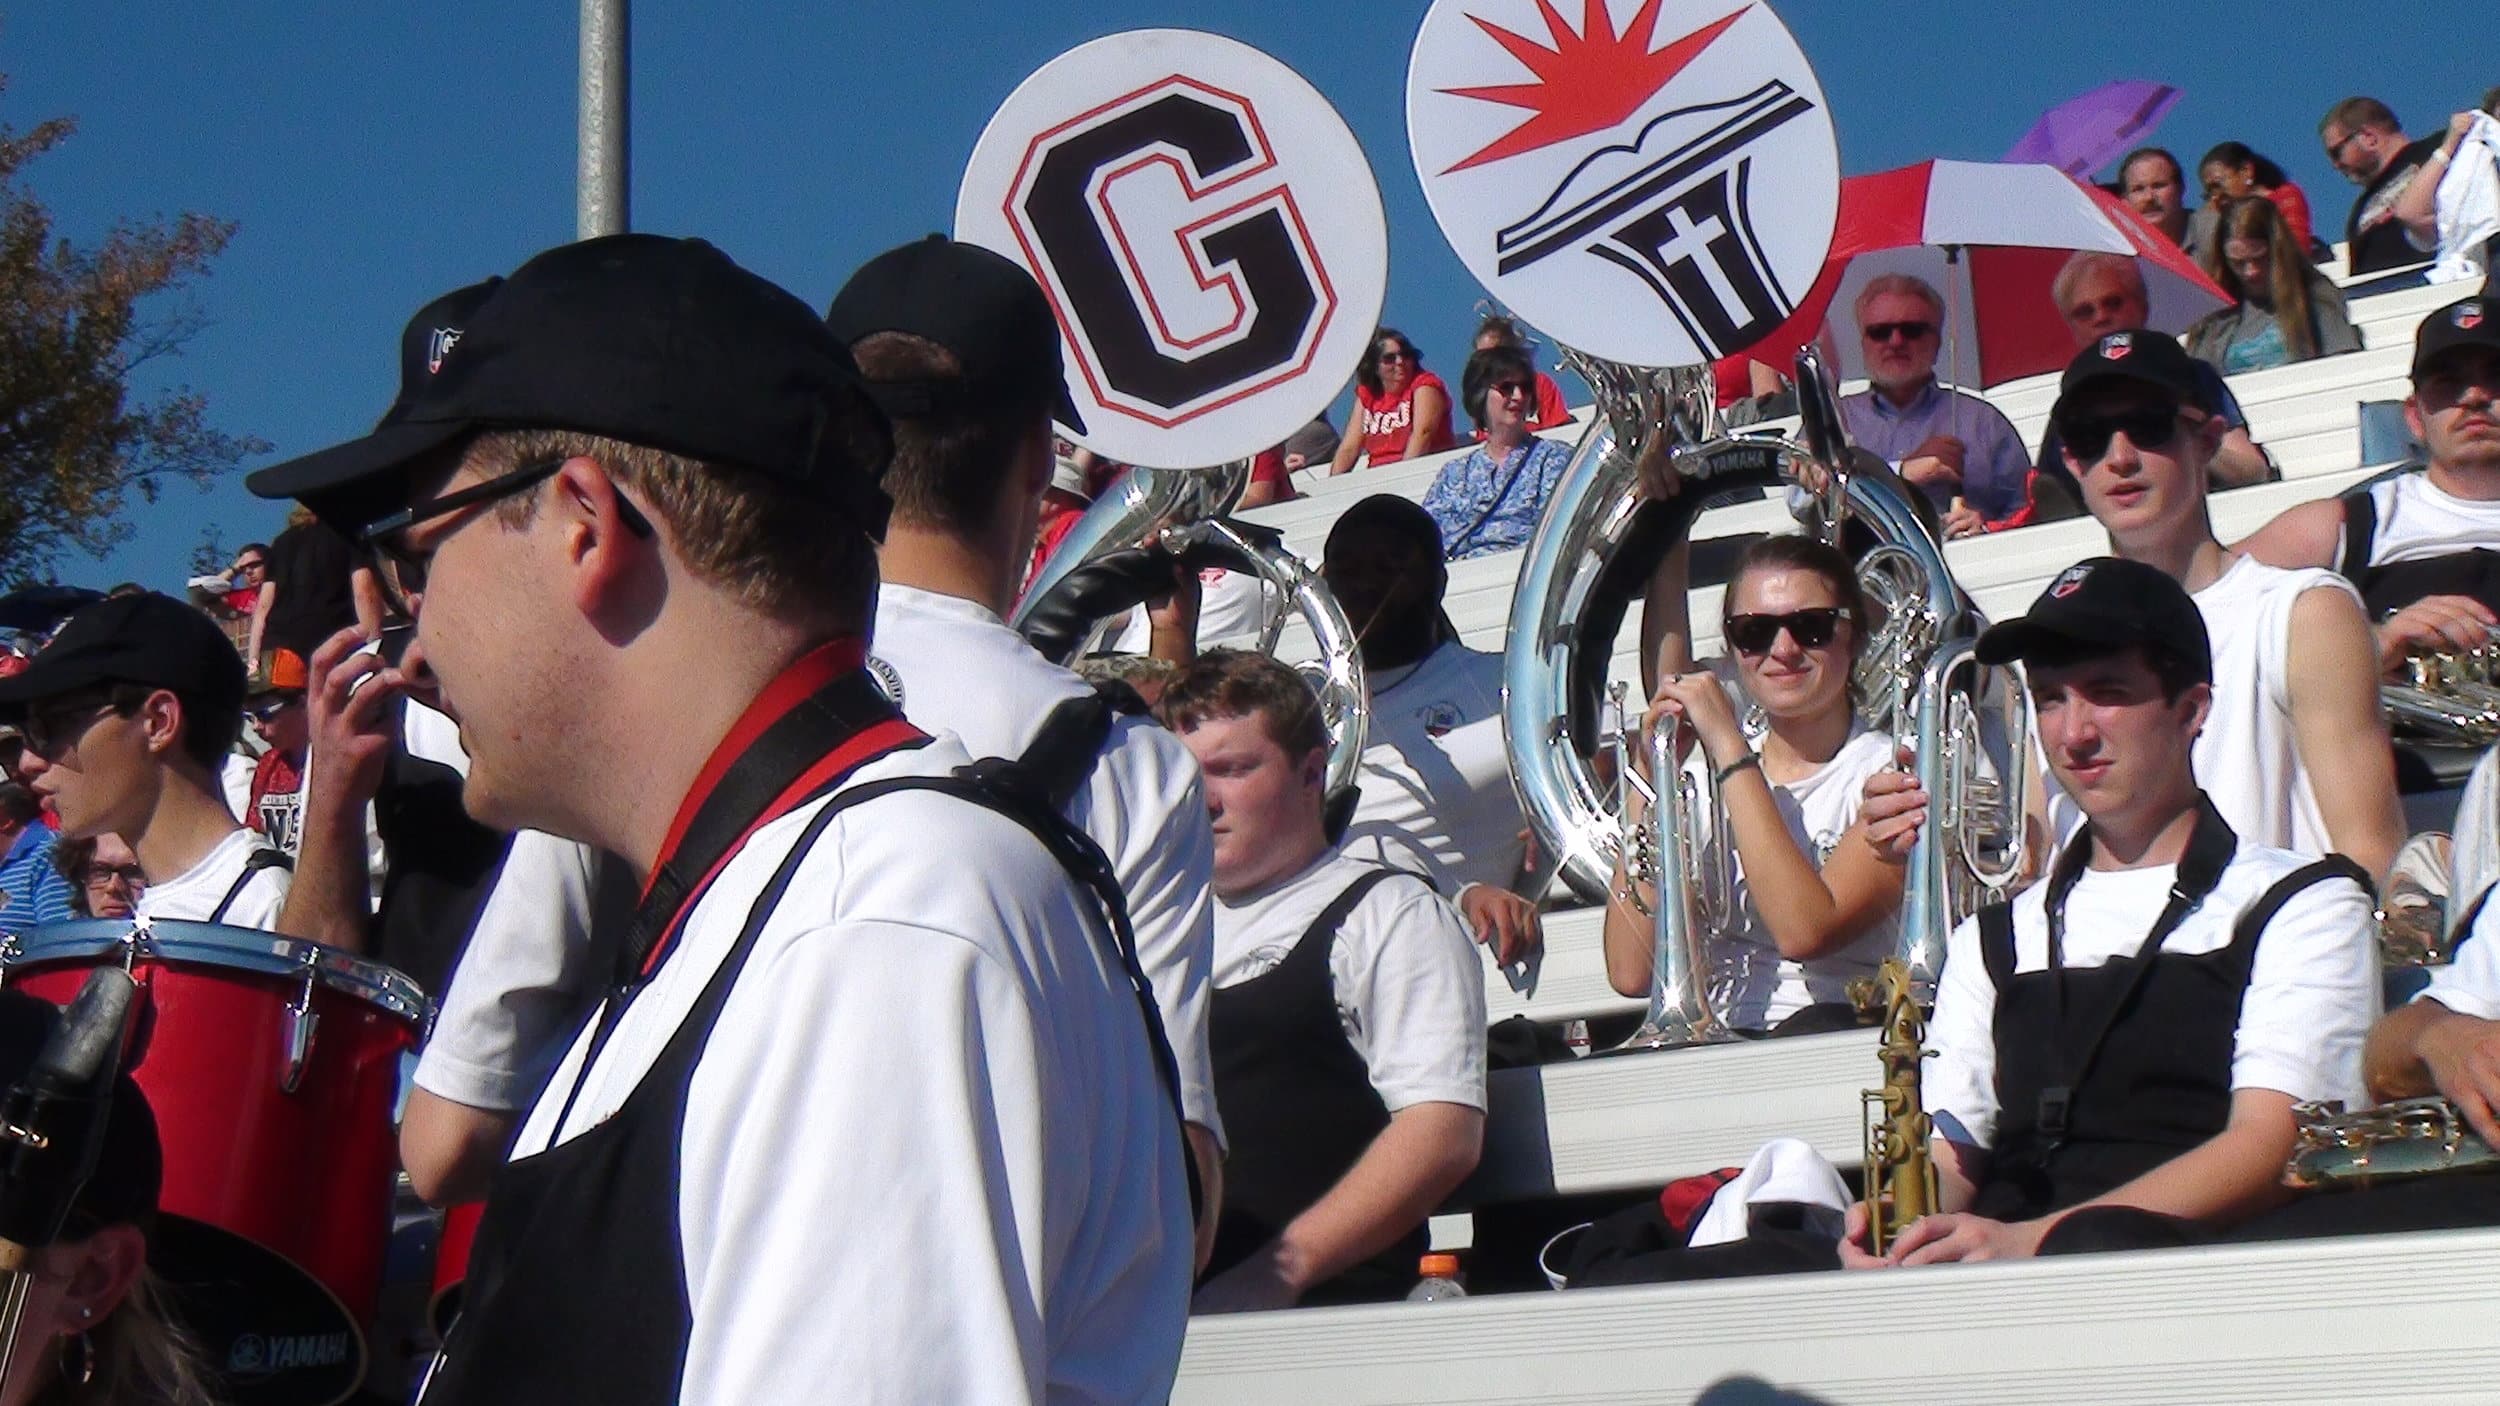  NGU's marching band getting prepared to perform. 